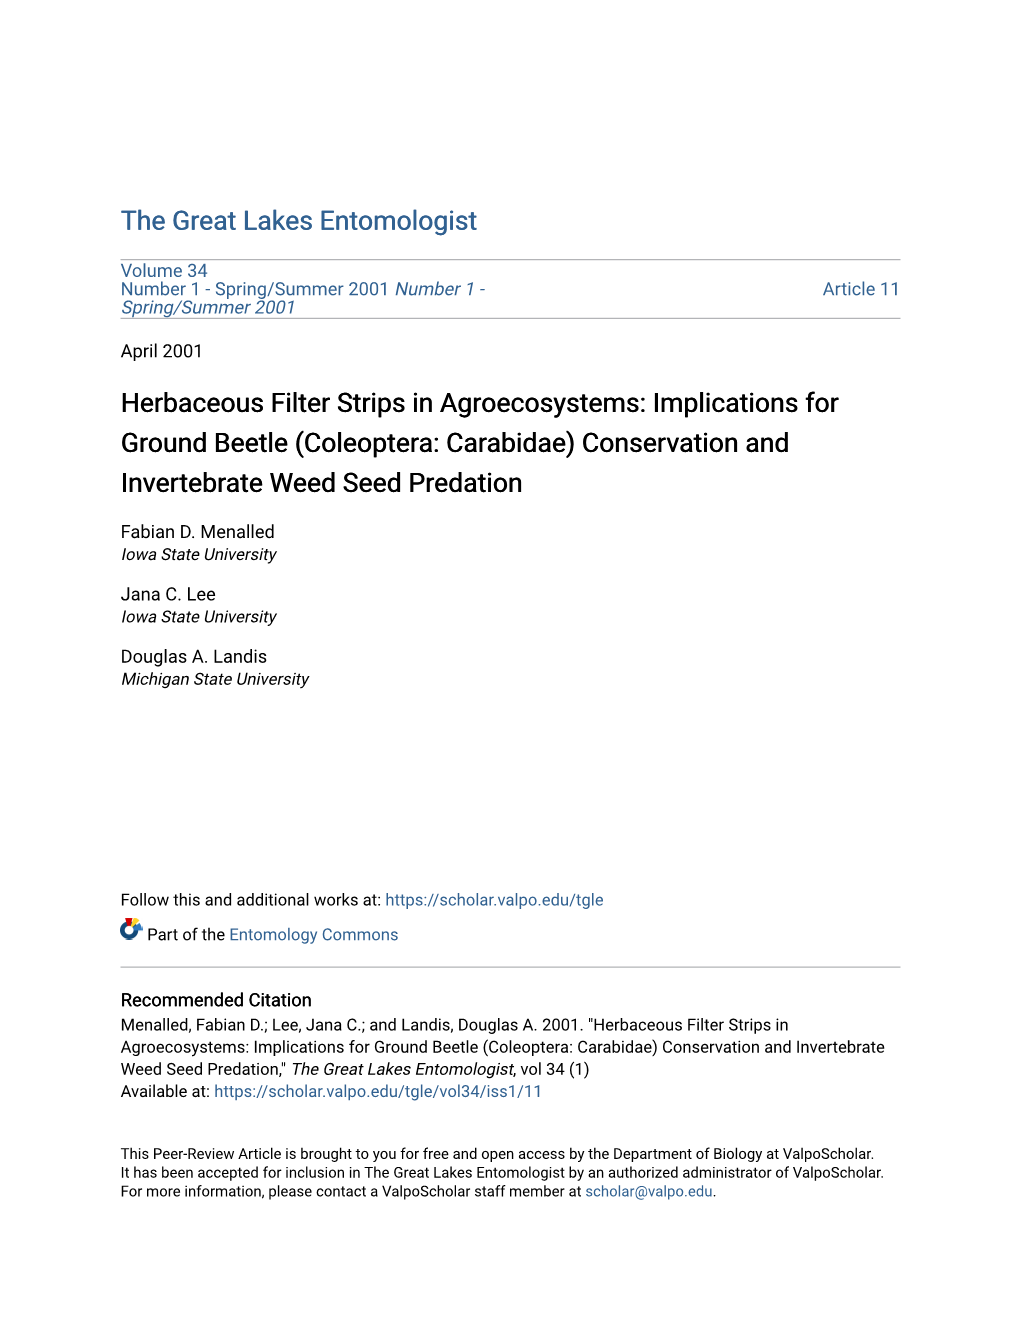 (Coleoptera: Carabidae) Conservation and Invertebrate Weed Seed Predation